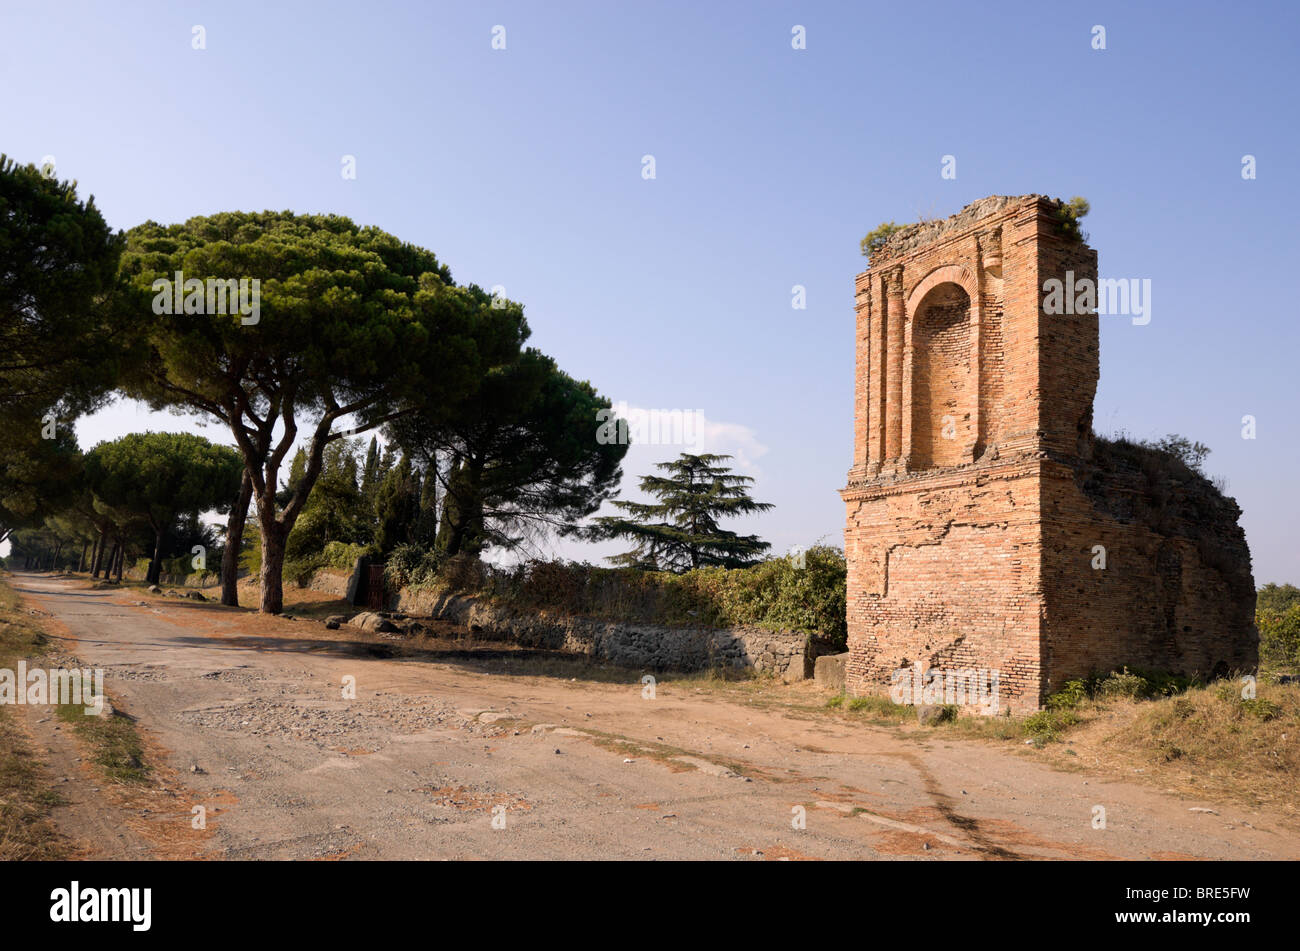 Rome, Italy, funebral monument along ancient Appian Way. Stock Photo